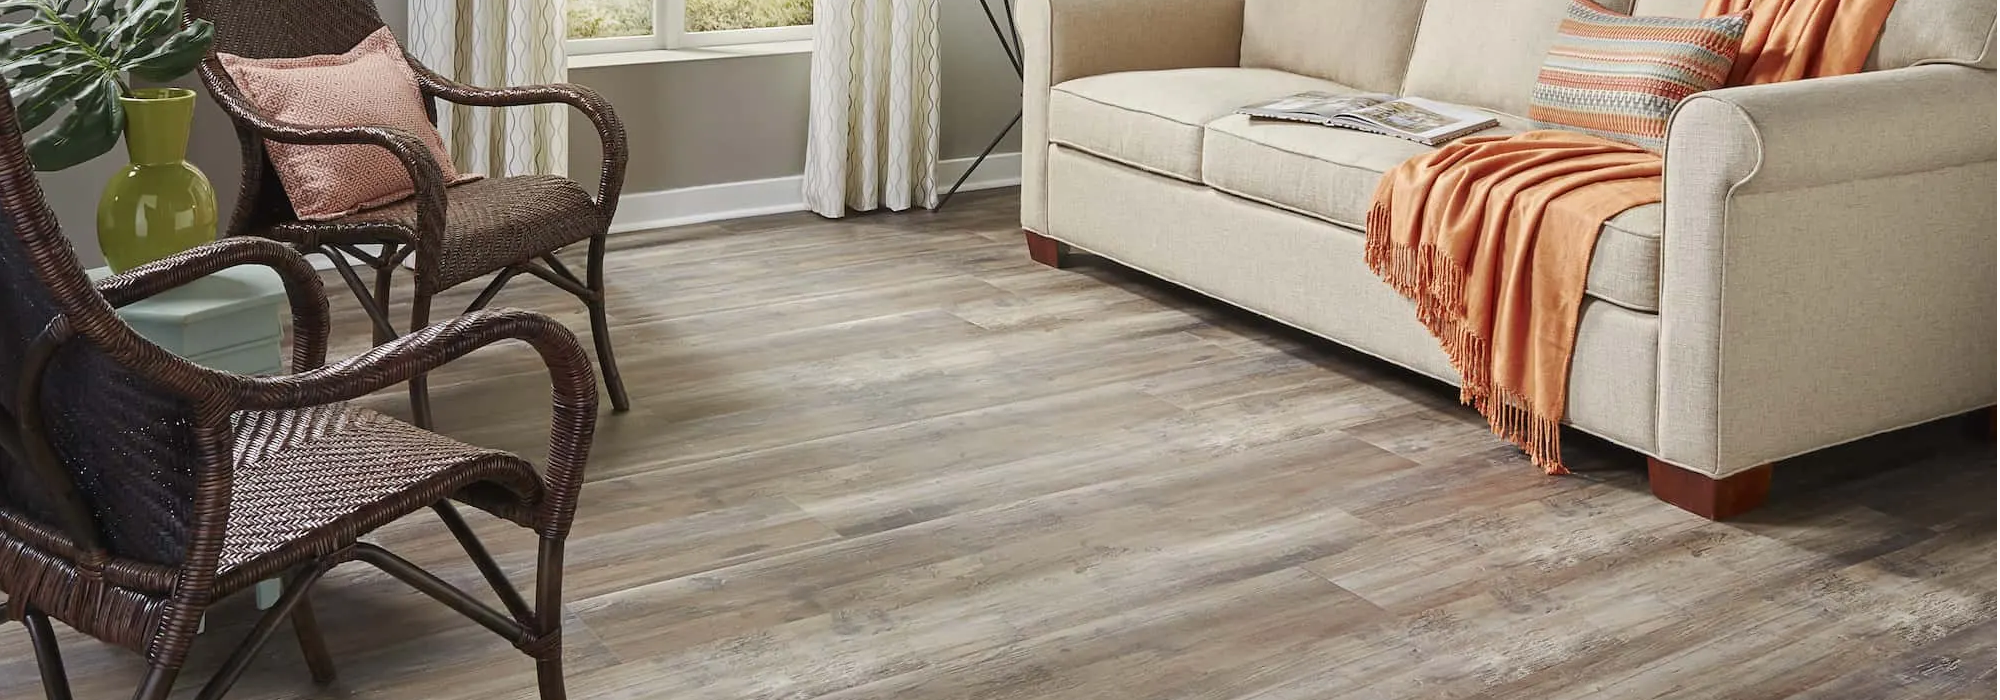 Wood like vinyl flooring available at Kaoud Rugs and Carpet